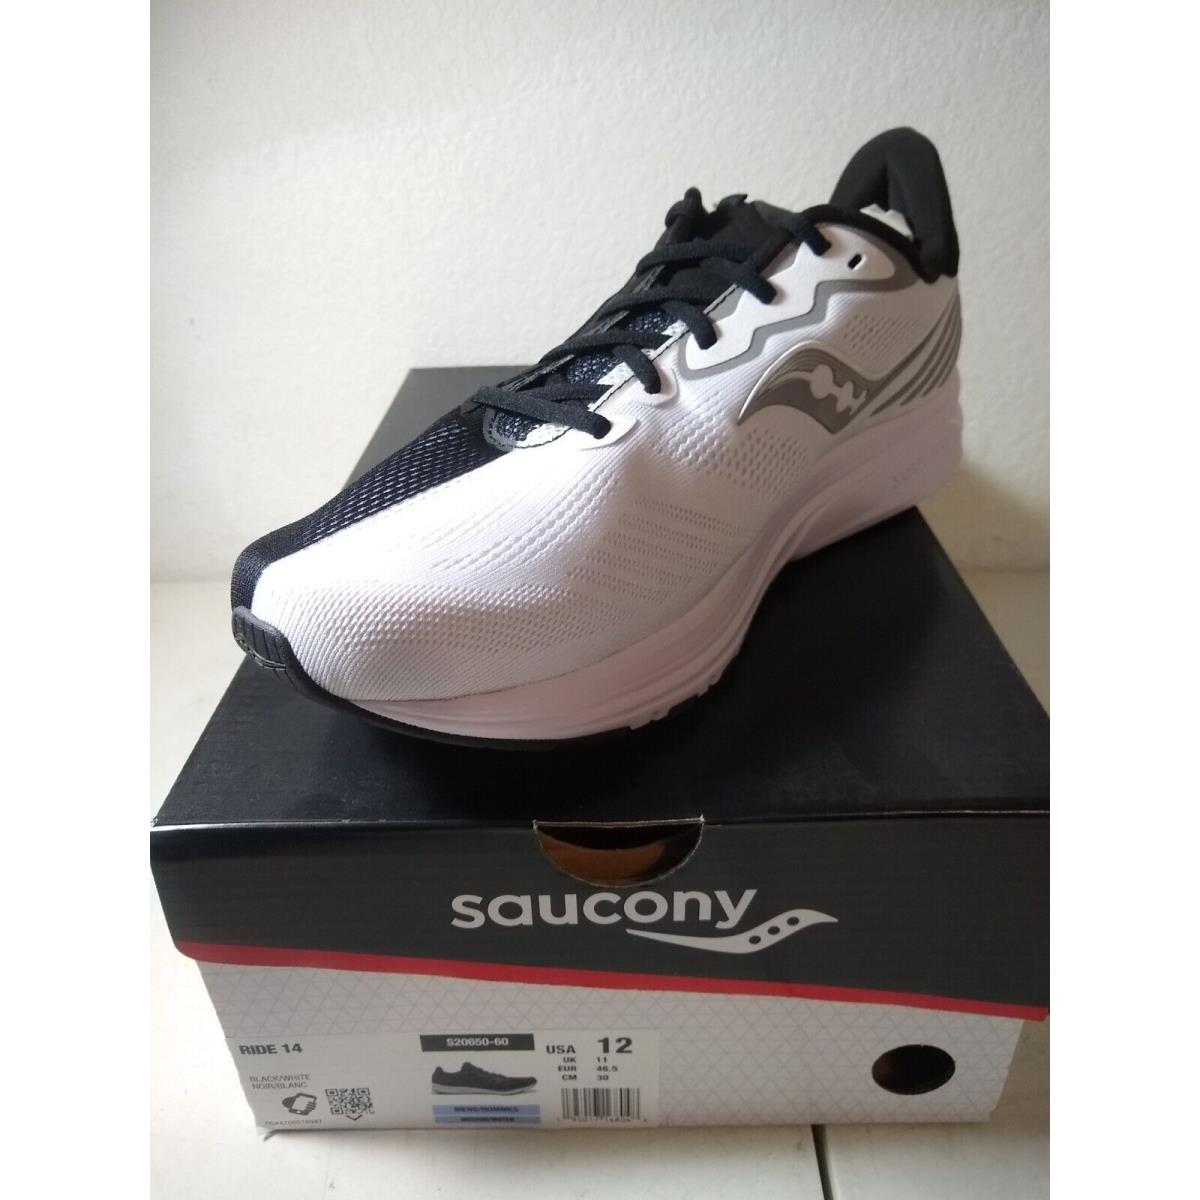 Saucony Ride 14 Running Shoes - Men`s Size 12 - White/black - Never Worn